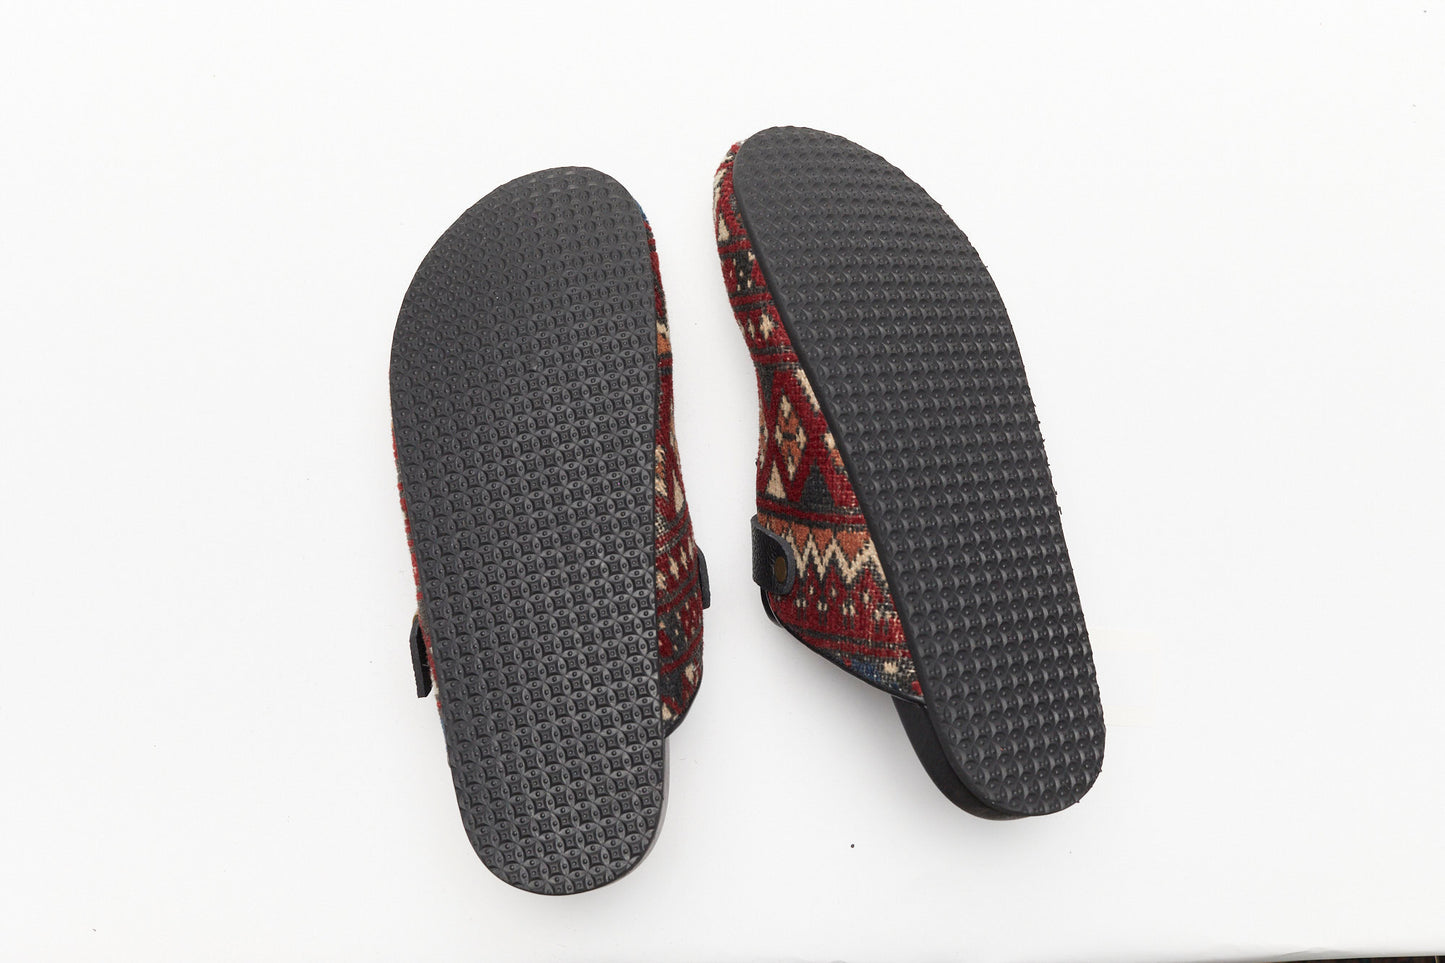 Rubber soles of rug mules. King Kennedy Rug Mules are one-of-a-kind and made of 100 year old antique Persian rug fragments with soft lambskin footbed and comfortable rubber sole. This pair is made of an antique Persian rug with vibrant deep red, cream, tan and dark grey patterns throughout.